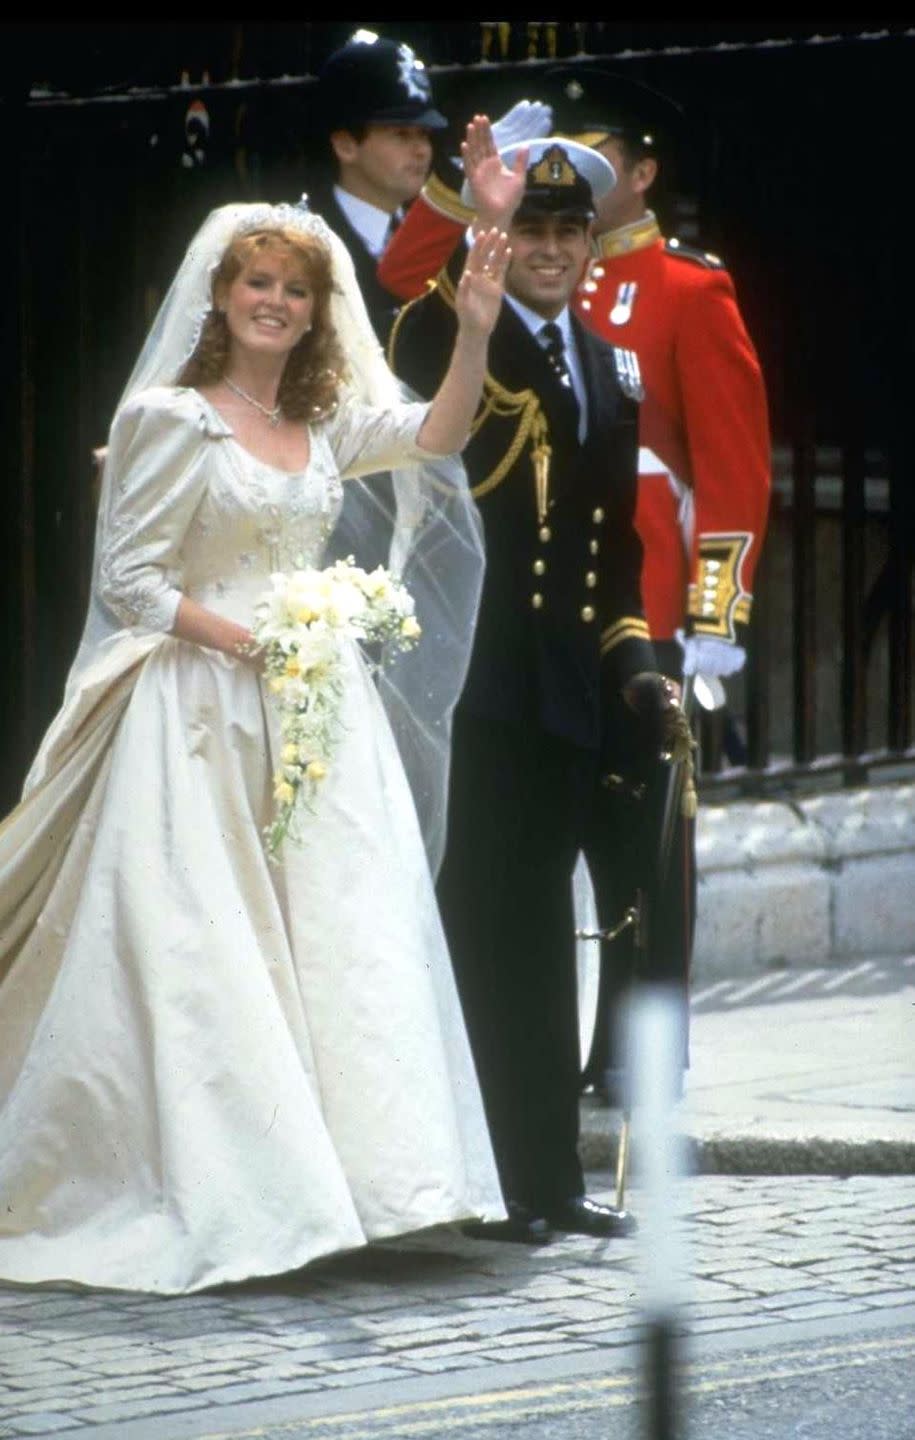 <p>Sarah Ferguson became Duchess of York in Lindka Cierach at her marriage to Prince Andrew in 1986. Fun fact: Her gown's embroidery featured bumblebees and anchors.</p>